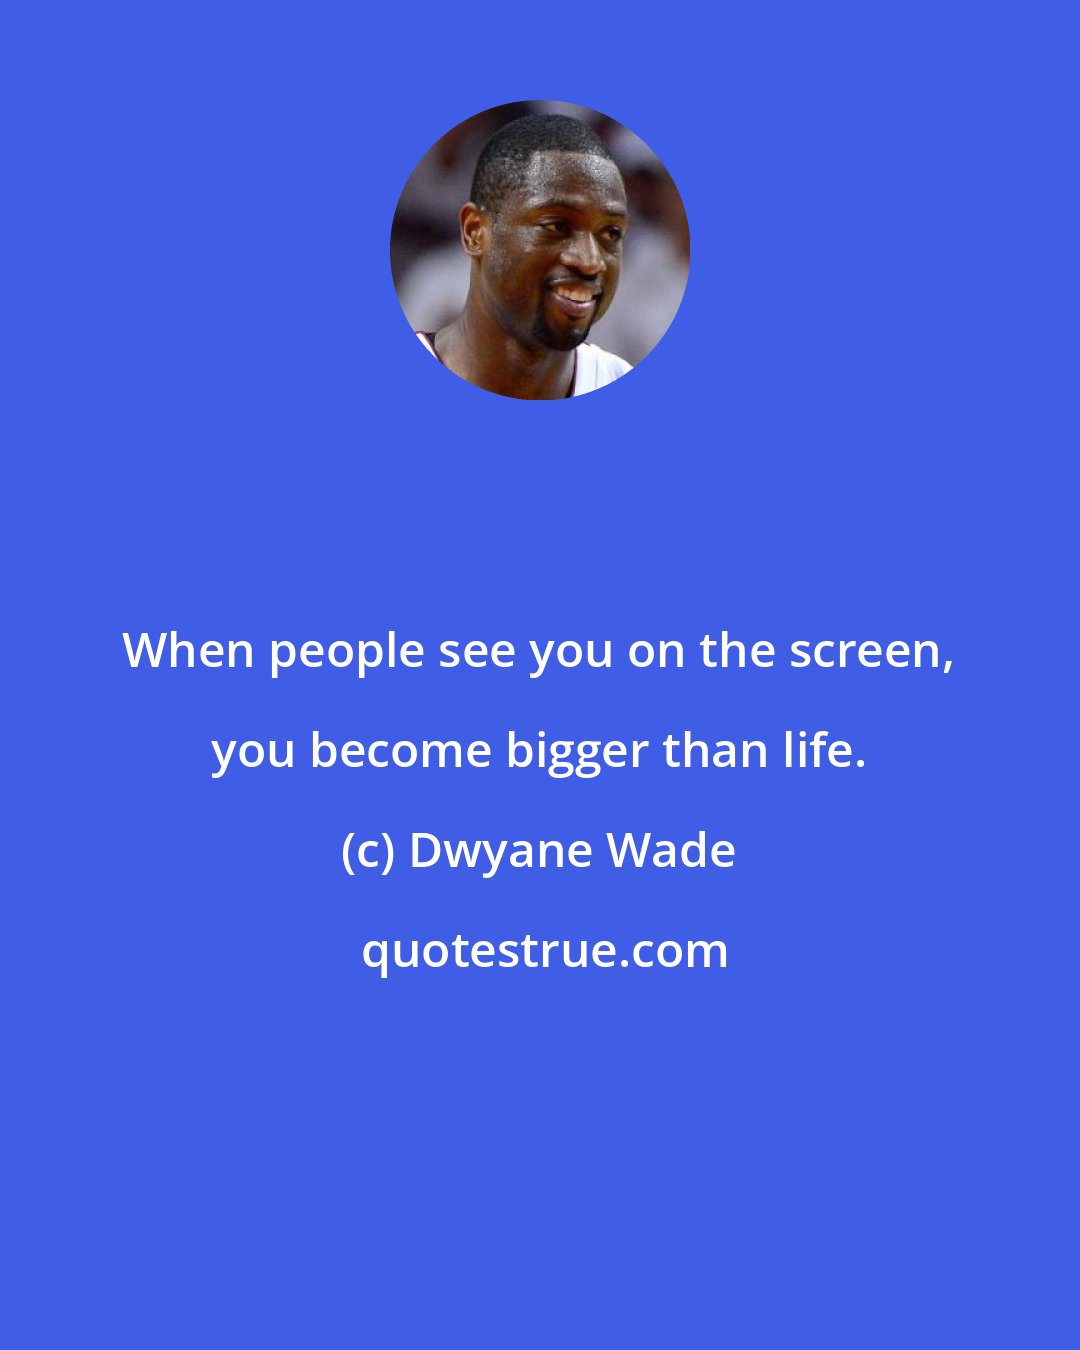 Dwyane Wade: When people see you on the screen, you become bigger than life.